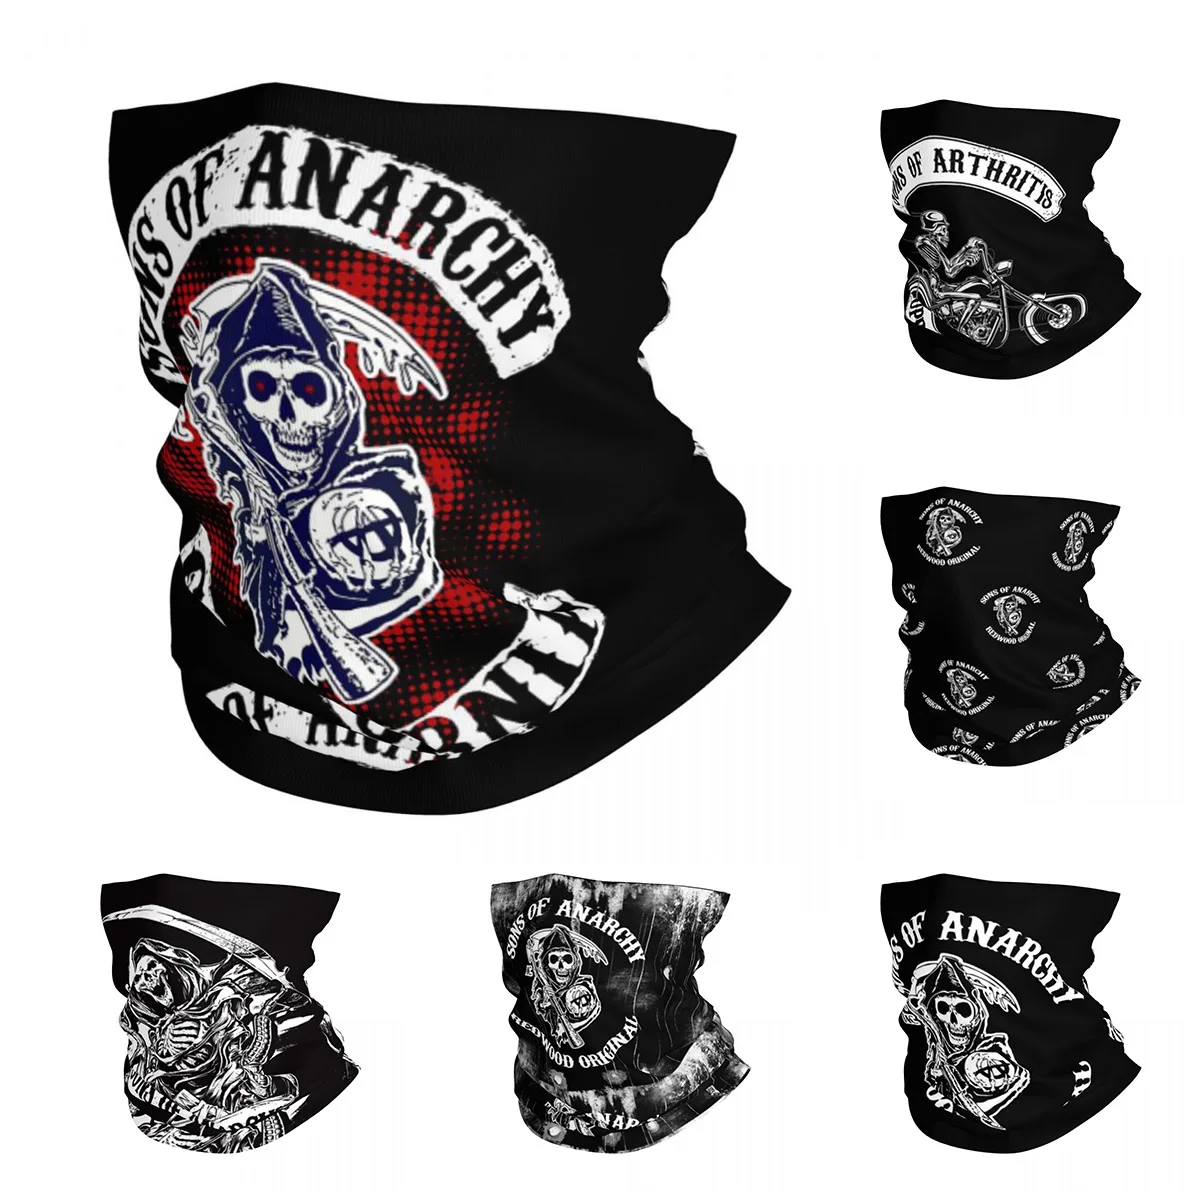 SOA Sons Of Anarchy Bandana Neck Cover Printed the Death Fear the Reaper Face Scarf Headwear Cycling Men Women Adult All Season